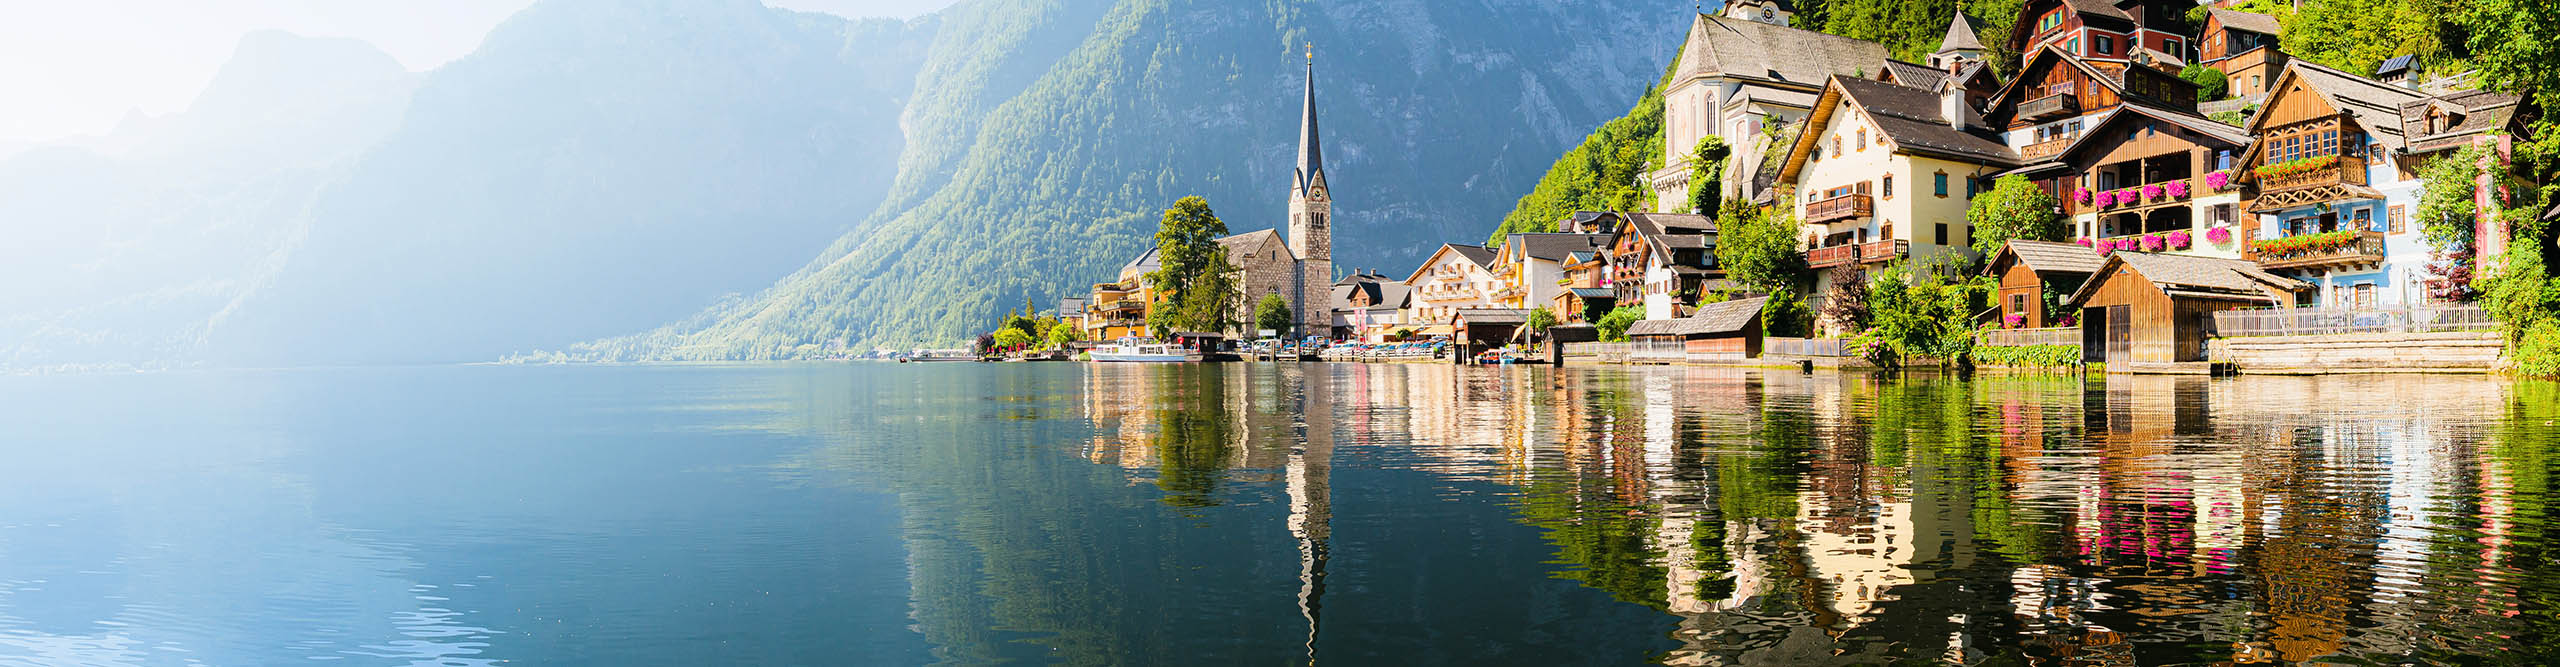 Hallstattersee lake in the Austrian Alps in scenic morning light on a beautiful sunny day in summer